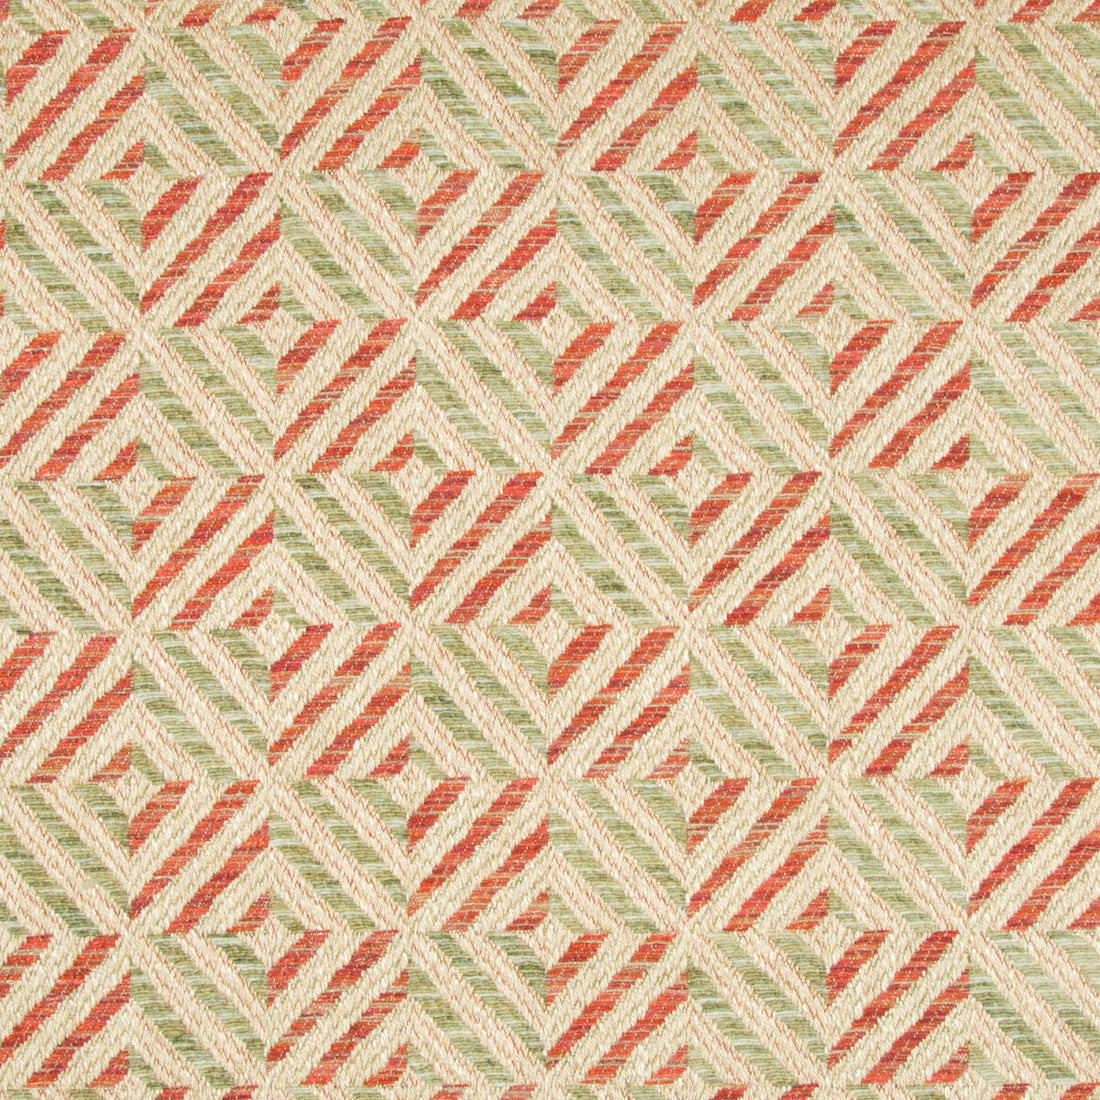 Verbier Diamond fabric in jade/red color - pattern 2017130.923.0 - by Lee Jofa in the Lodge II Weaves And Embroideries collection